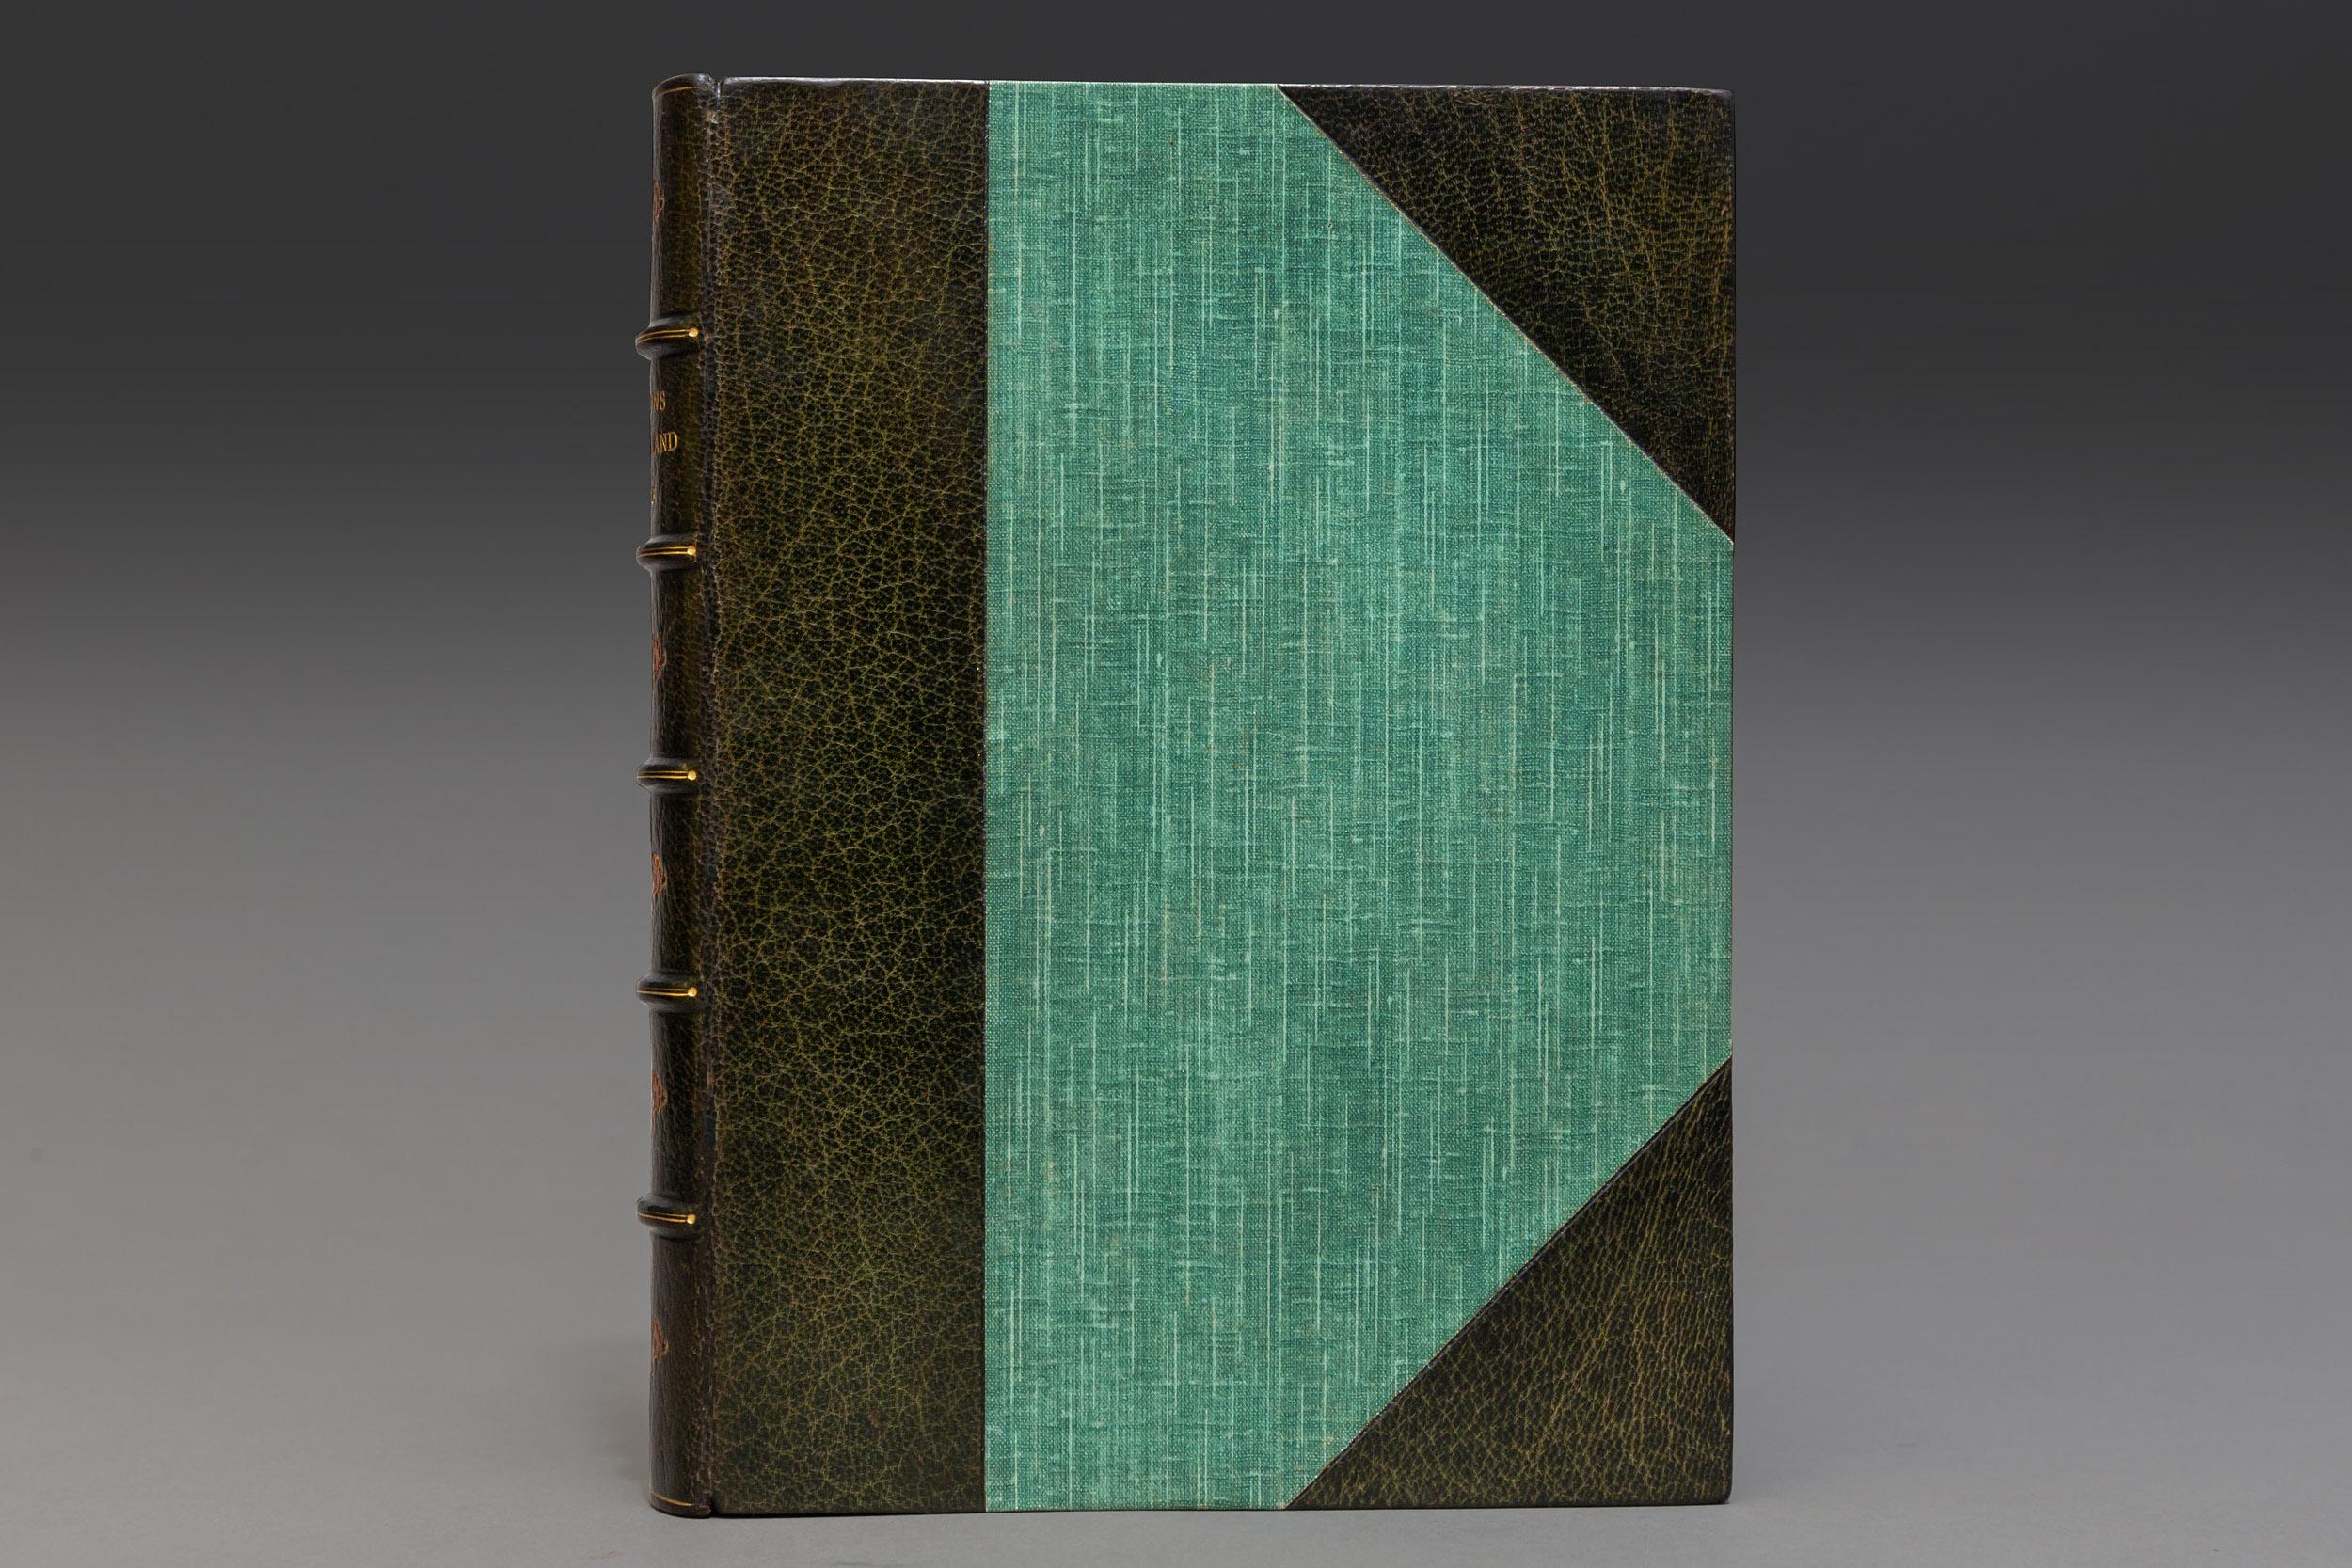 1 Volume

Painted in Color by Beatrice Parsons. Bound in 3/4 green Morocco by Henry Young and Sons, Cloth boards, top edges gilt, raised bands, gilt panels (Few preliminary pages with some foxing)

Text and Plates are clean

Published: London: